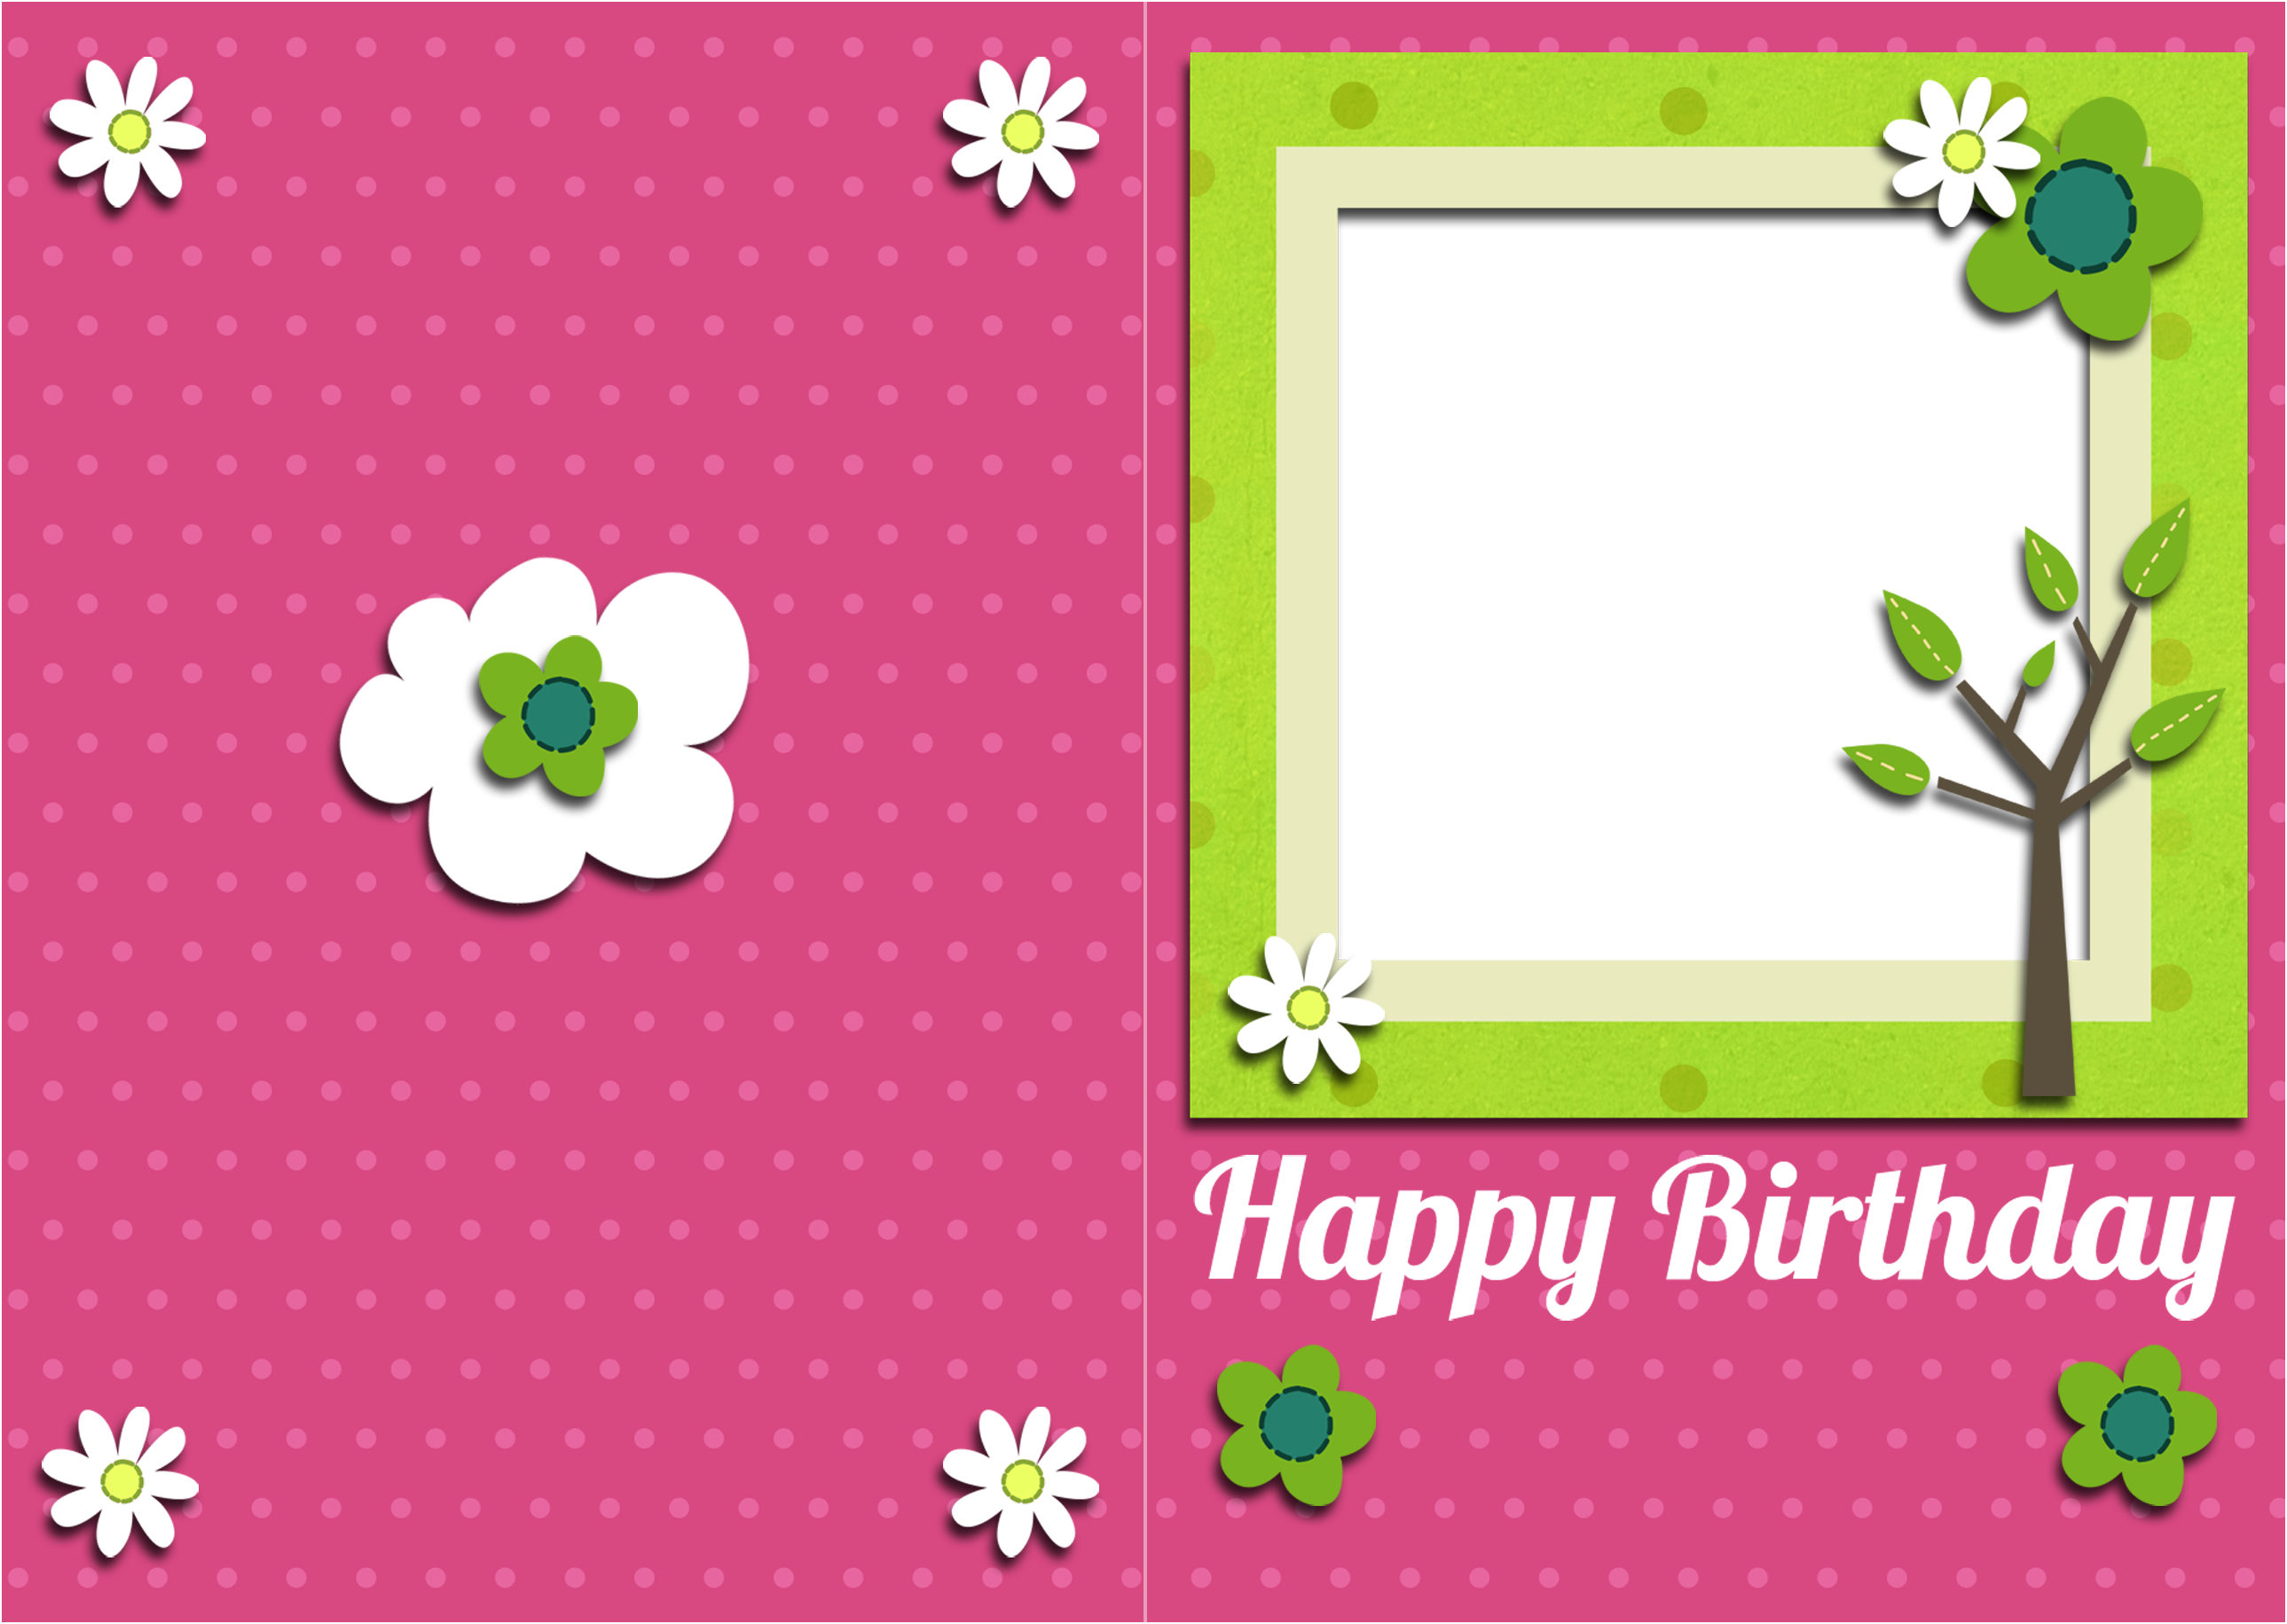 35-happy-birthday-cards-free-to-download-the-wow-style